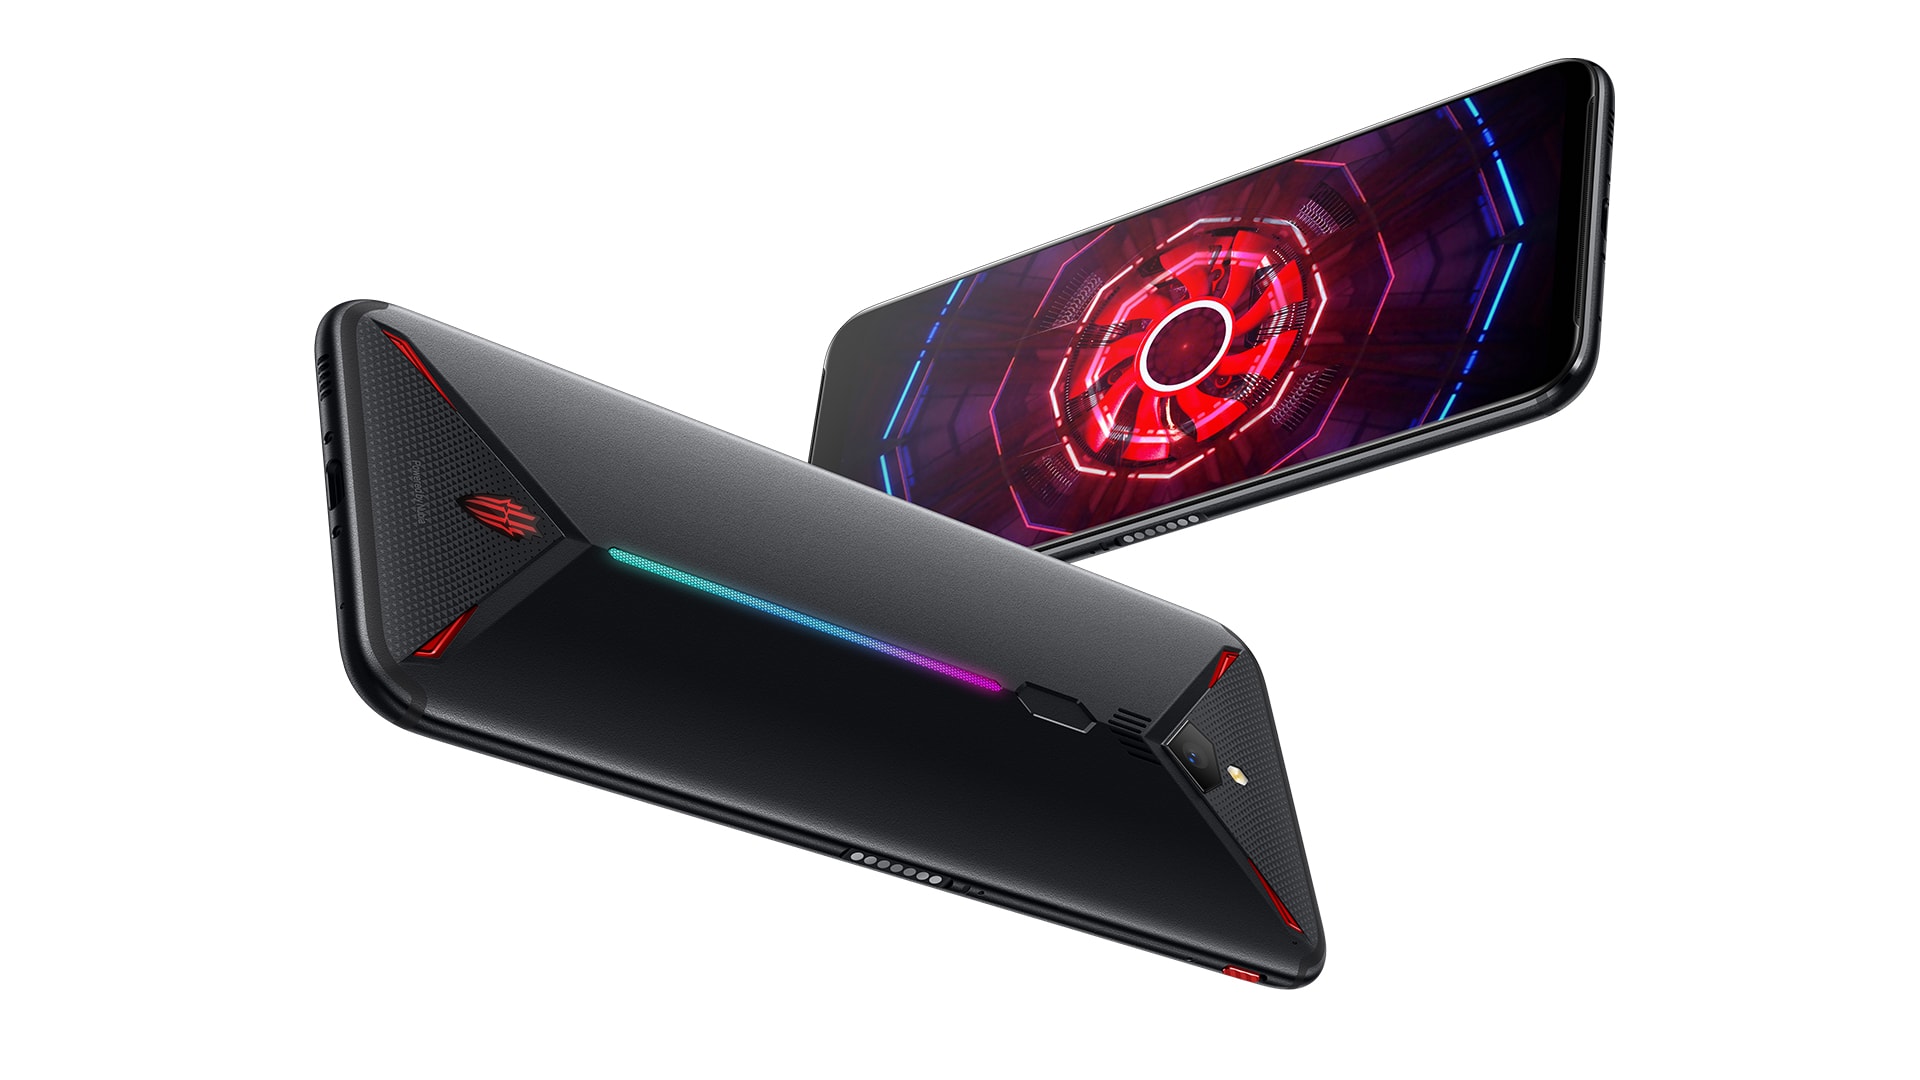 Nubia Red Magic 3 ready to ship with 90Hz display, 8GB RAM